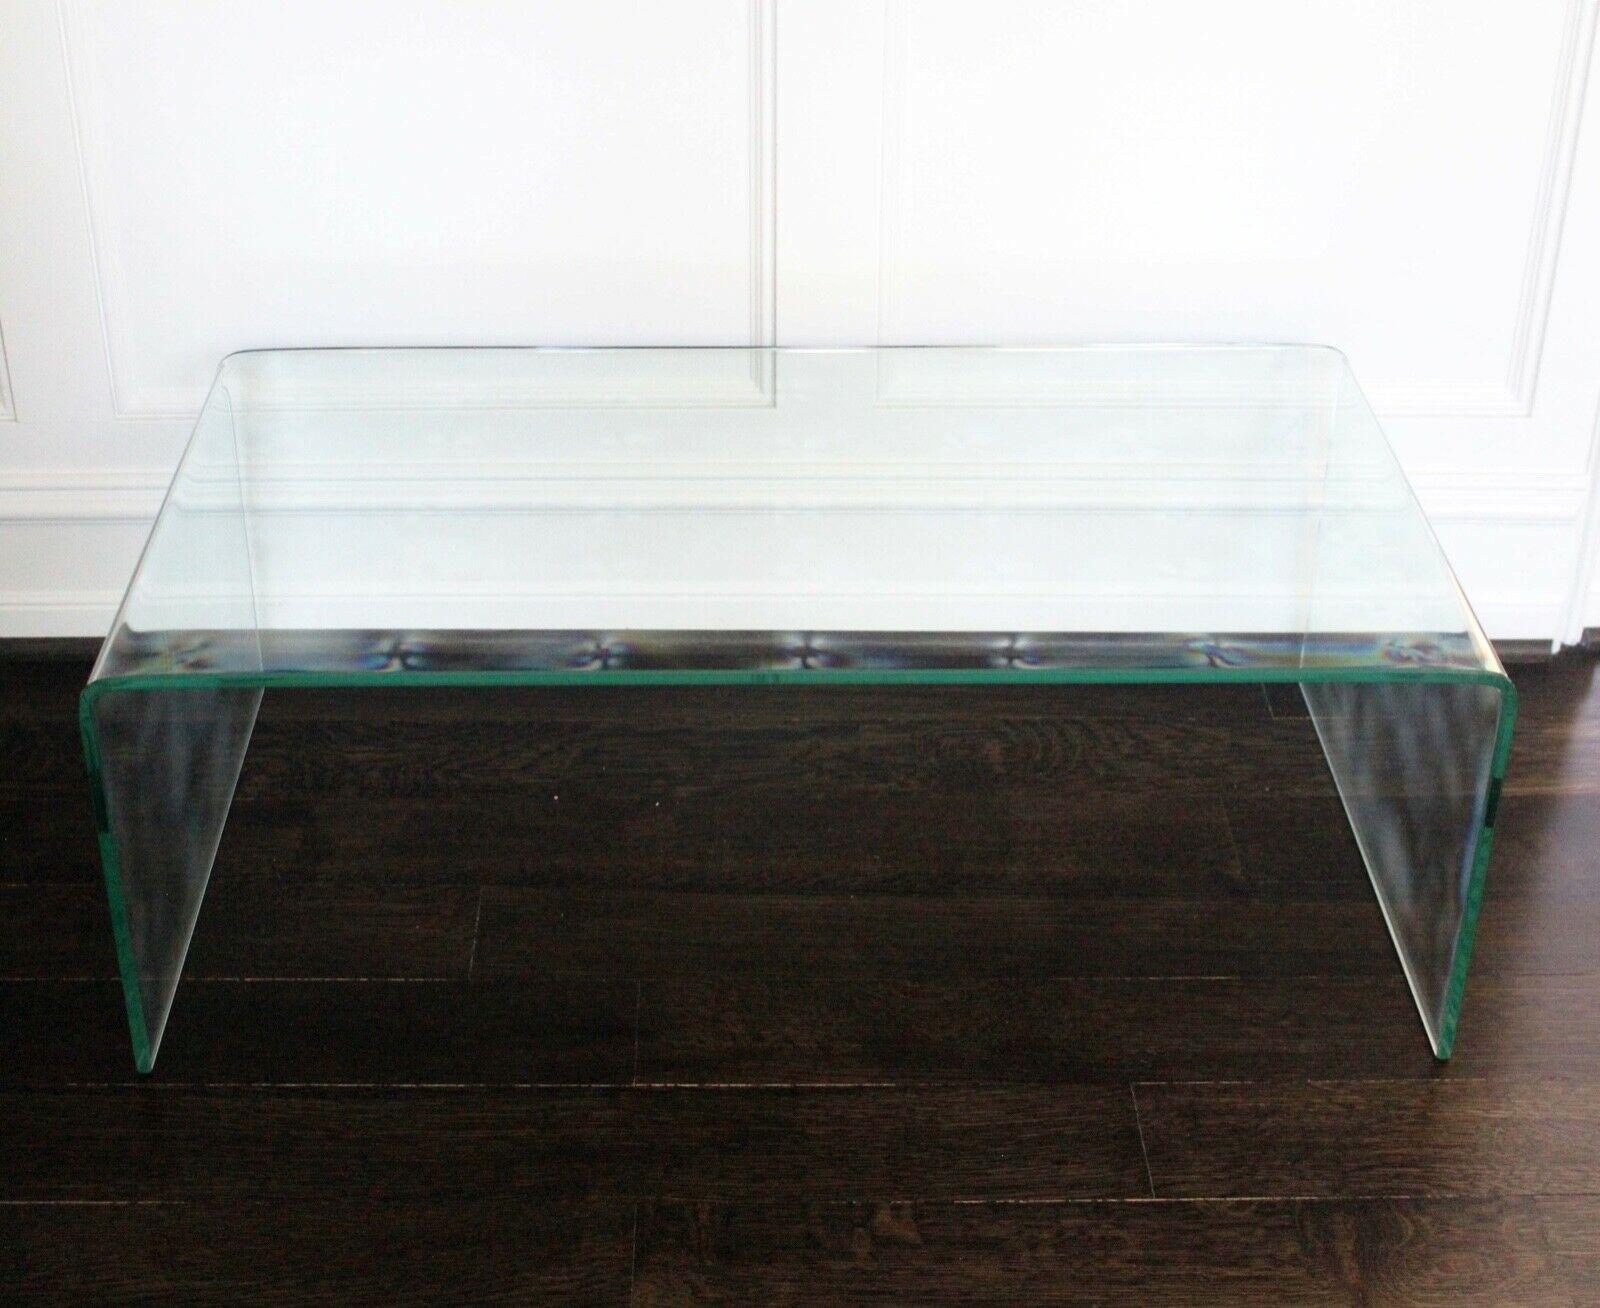 For your consideration is this stunning pair of solid single sheet glass waterfall coffee Cocktail Tables. Dimensions: 39w x 21.75d x 13.5h.
 